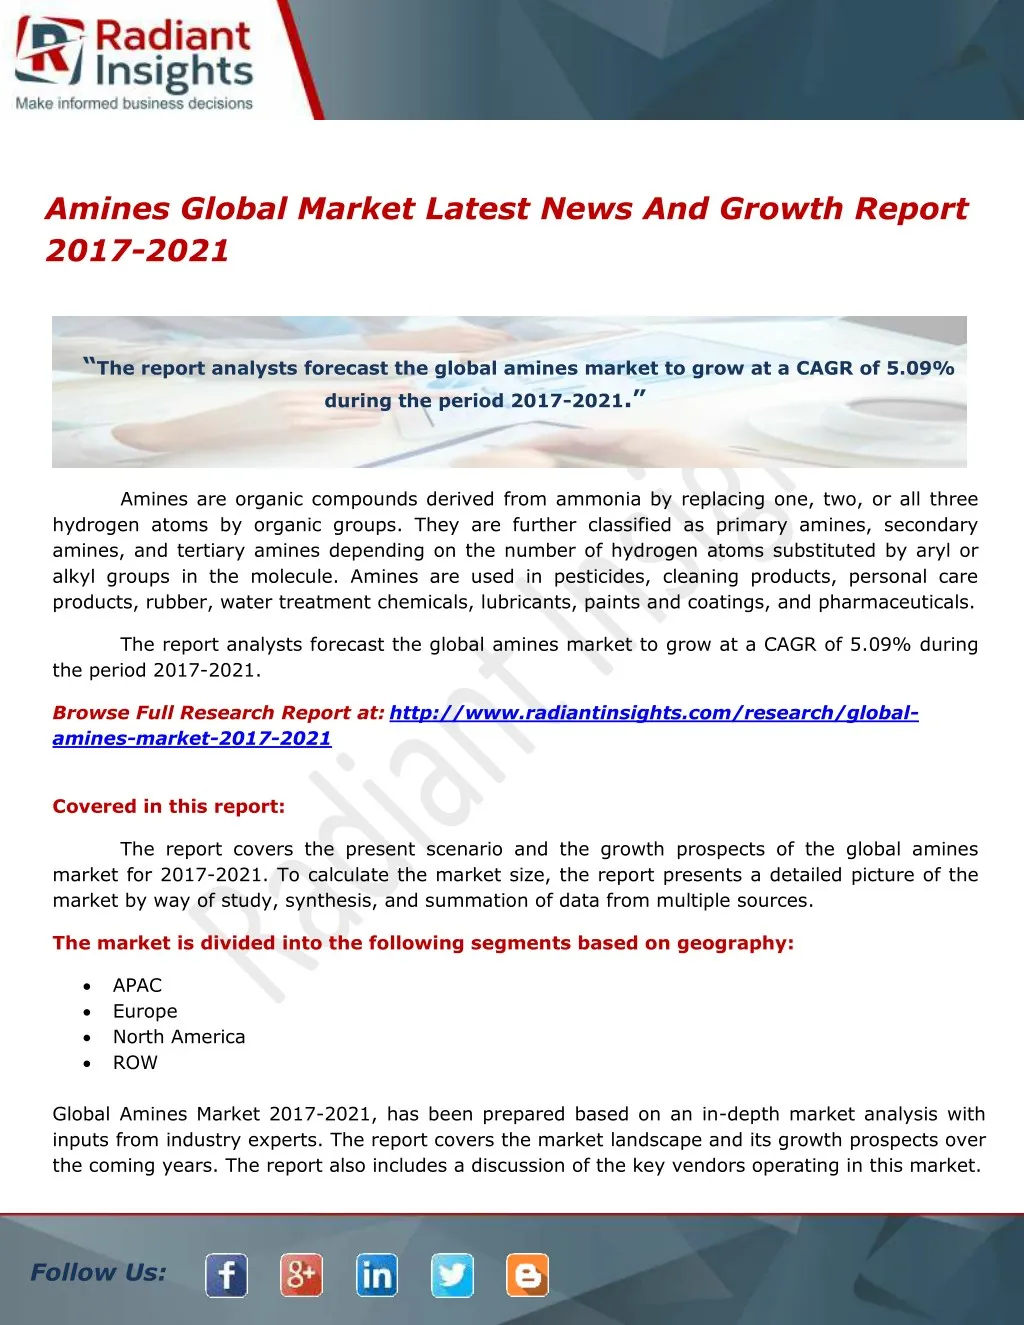 amines global market latest news and growth